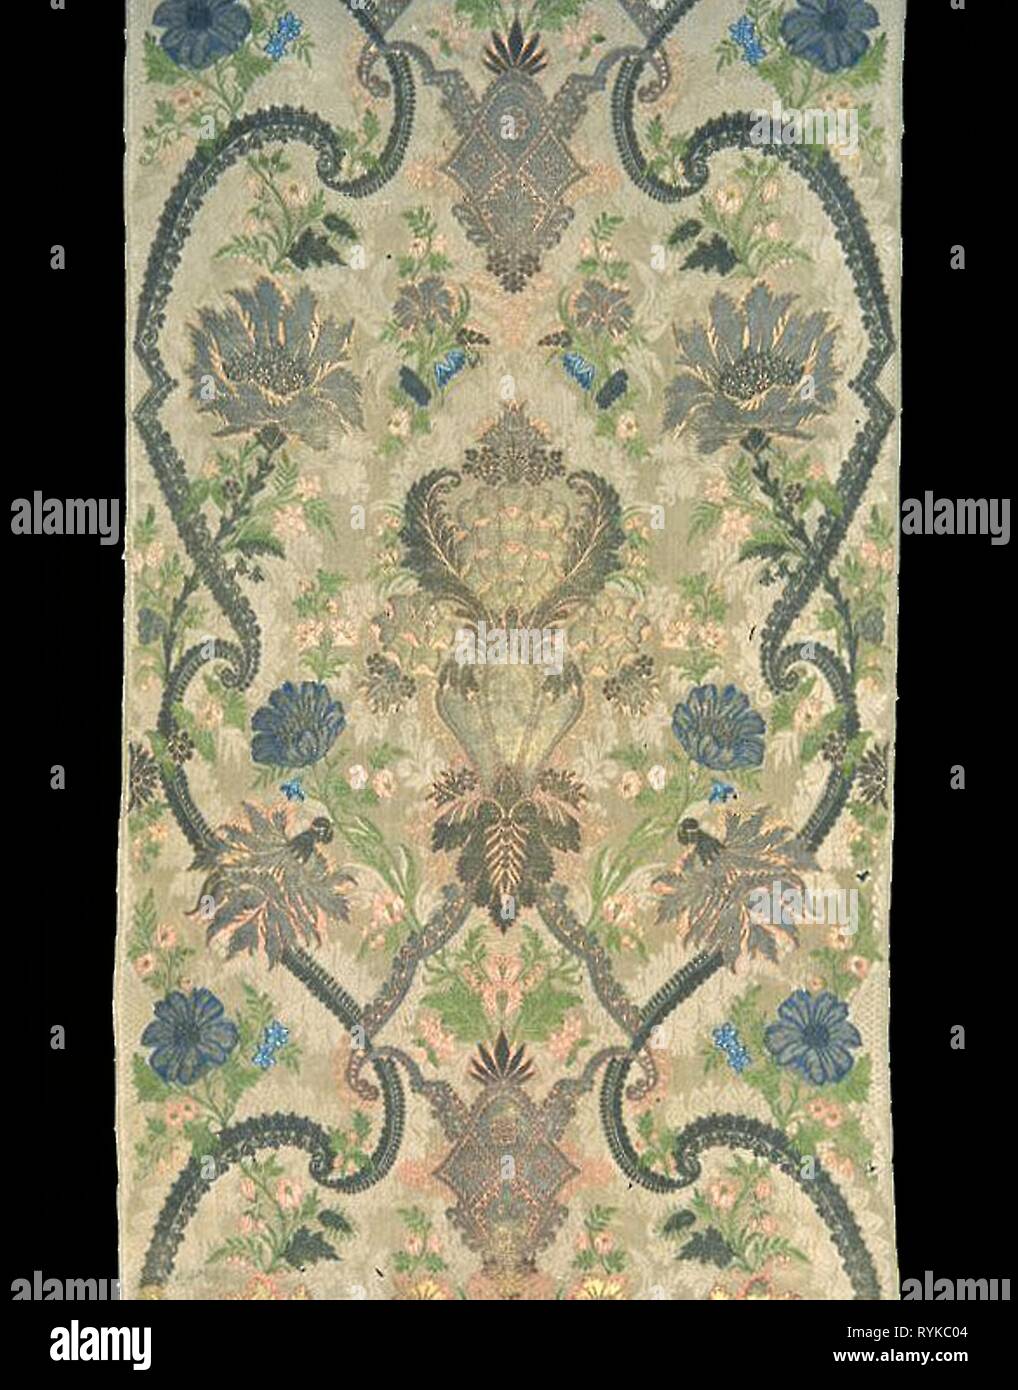 Panel (formerly a Curtain from a Sedan Chair). France. Date: 1715-1725. Dimensions: a: 180.3 x 107.2 cm (71 x 42 1/8 in.)  b: 96.5 x 53.7 cm (37 7/8 x 21 1/4 in.)  c: 98.5 x 53.9 cm (38 3/4 x 21 1/4 in.)  Warp repeat: 68- 70.4 cm (26 3/4-27 3/4 in.)  Loom width: 54 cm (21 1/4 in.)  Width between selvages: 52.8 cm (20 3/4 in.). Silk, gold and silver gilt strips wound around silk fiber core, warp-float faced 7:1 satin weave with supplementary brocading wefts tied by supplementary binding warps in 3:1 twill interlacing and self-patterned by areas of plain weave. Origin: France. Museum: The Chicag Stock Photo